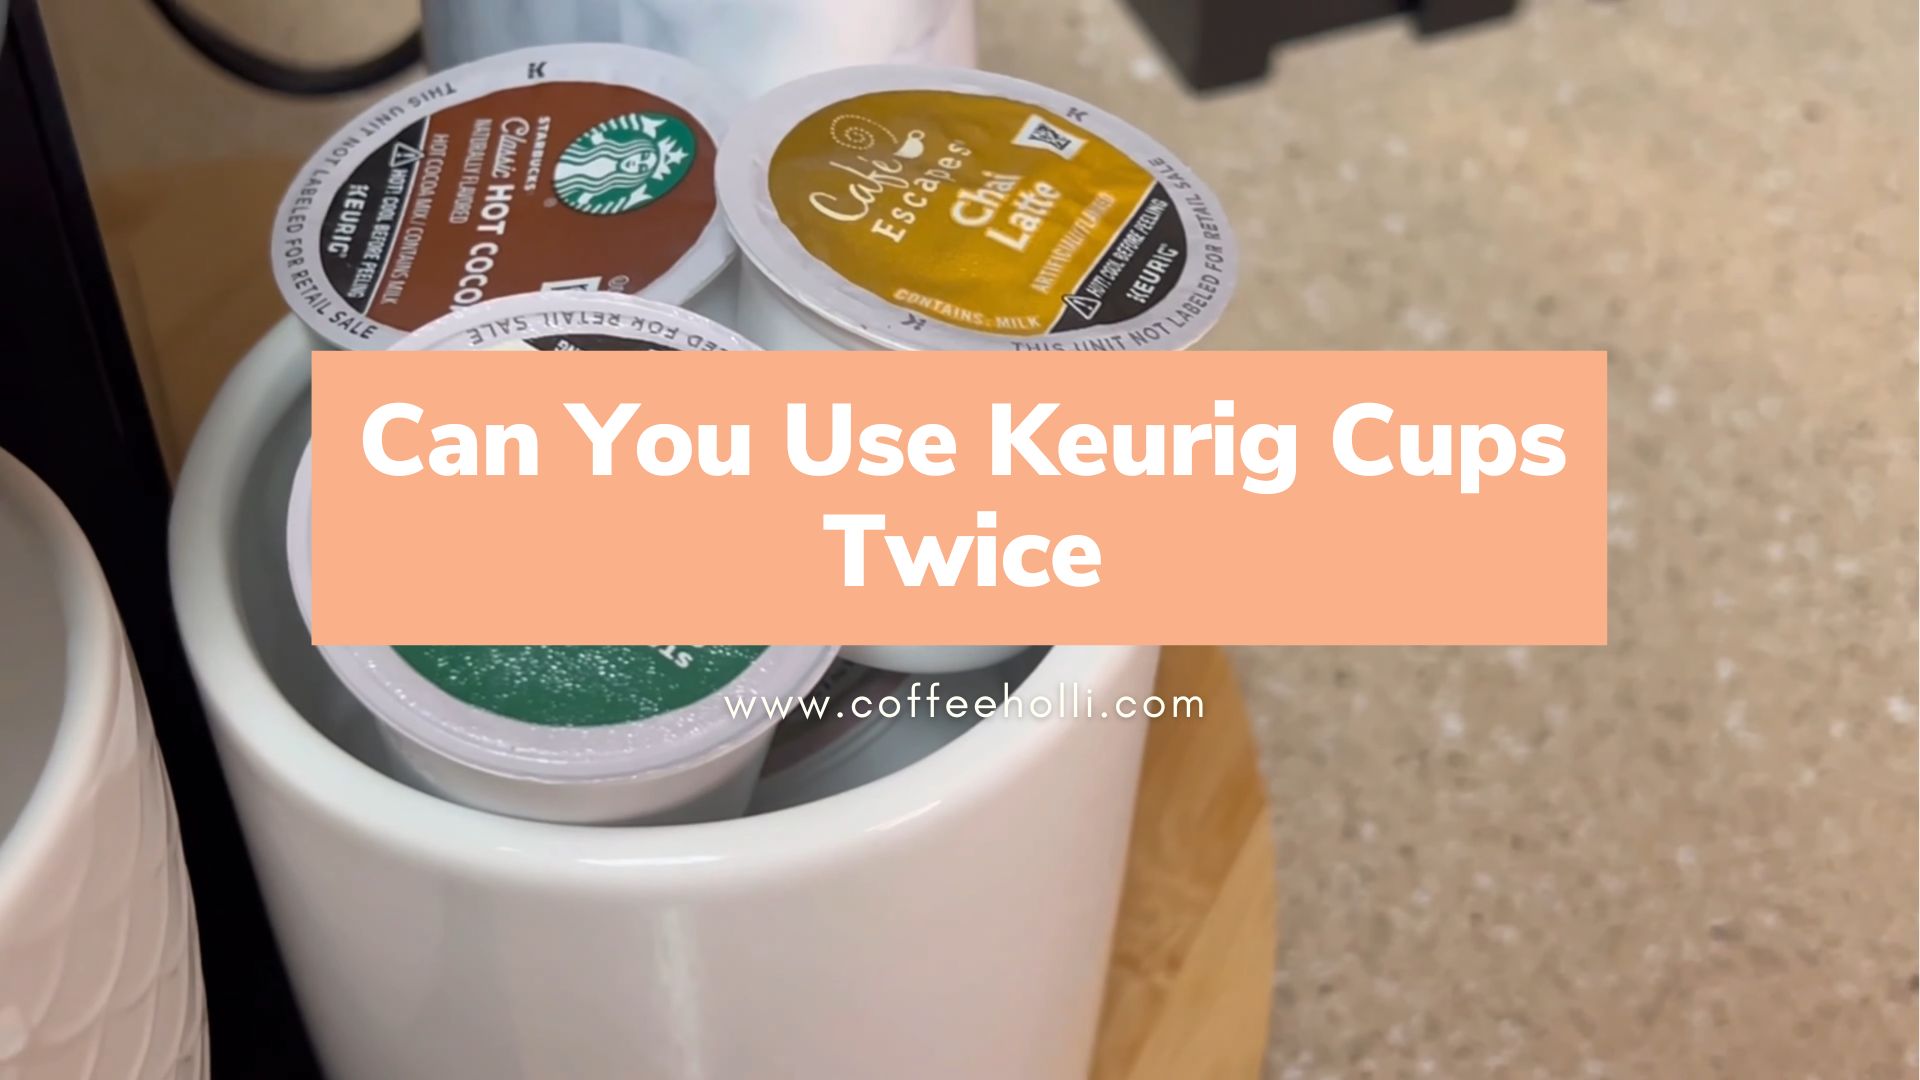 Can You Use Keurig Cups Twice